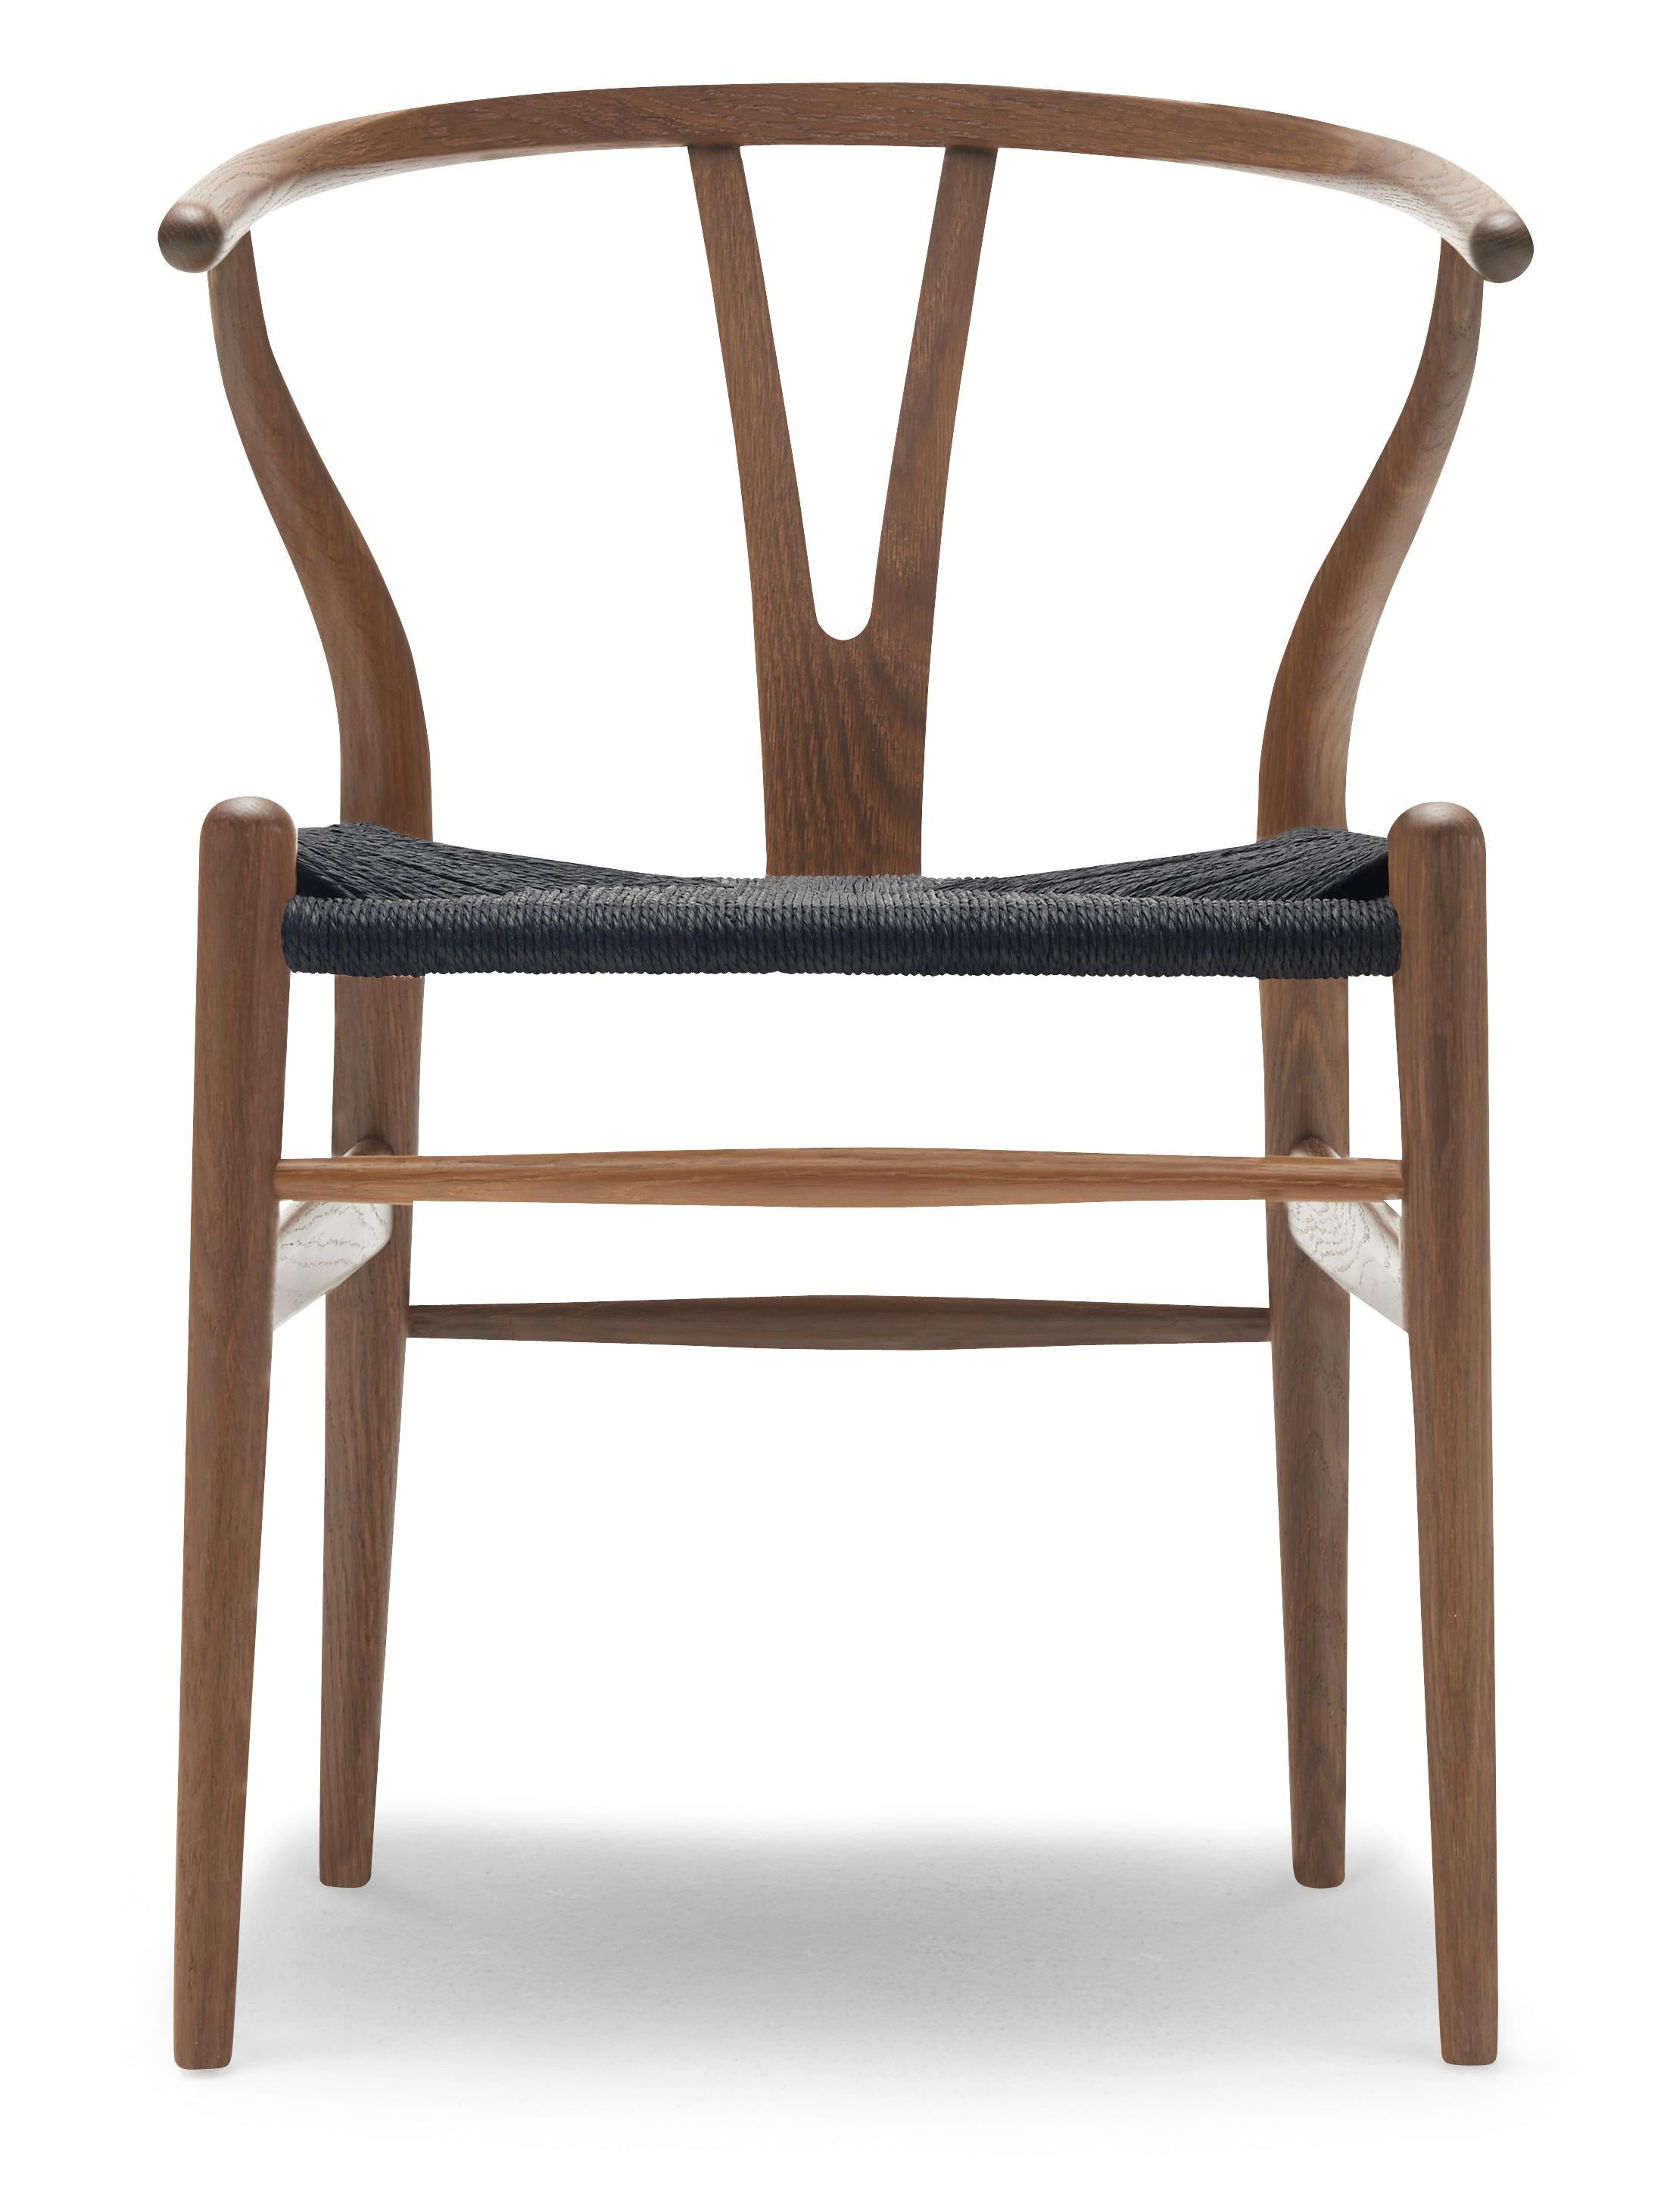 Brown (Oak Smoked Oil) CH24 Wishbone Chair in Wood Finishes with Black Papercord Seat by Hans J. Wegner